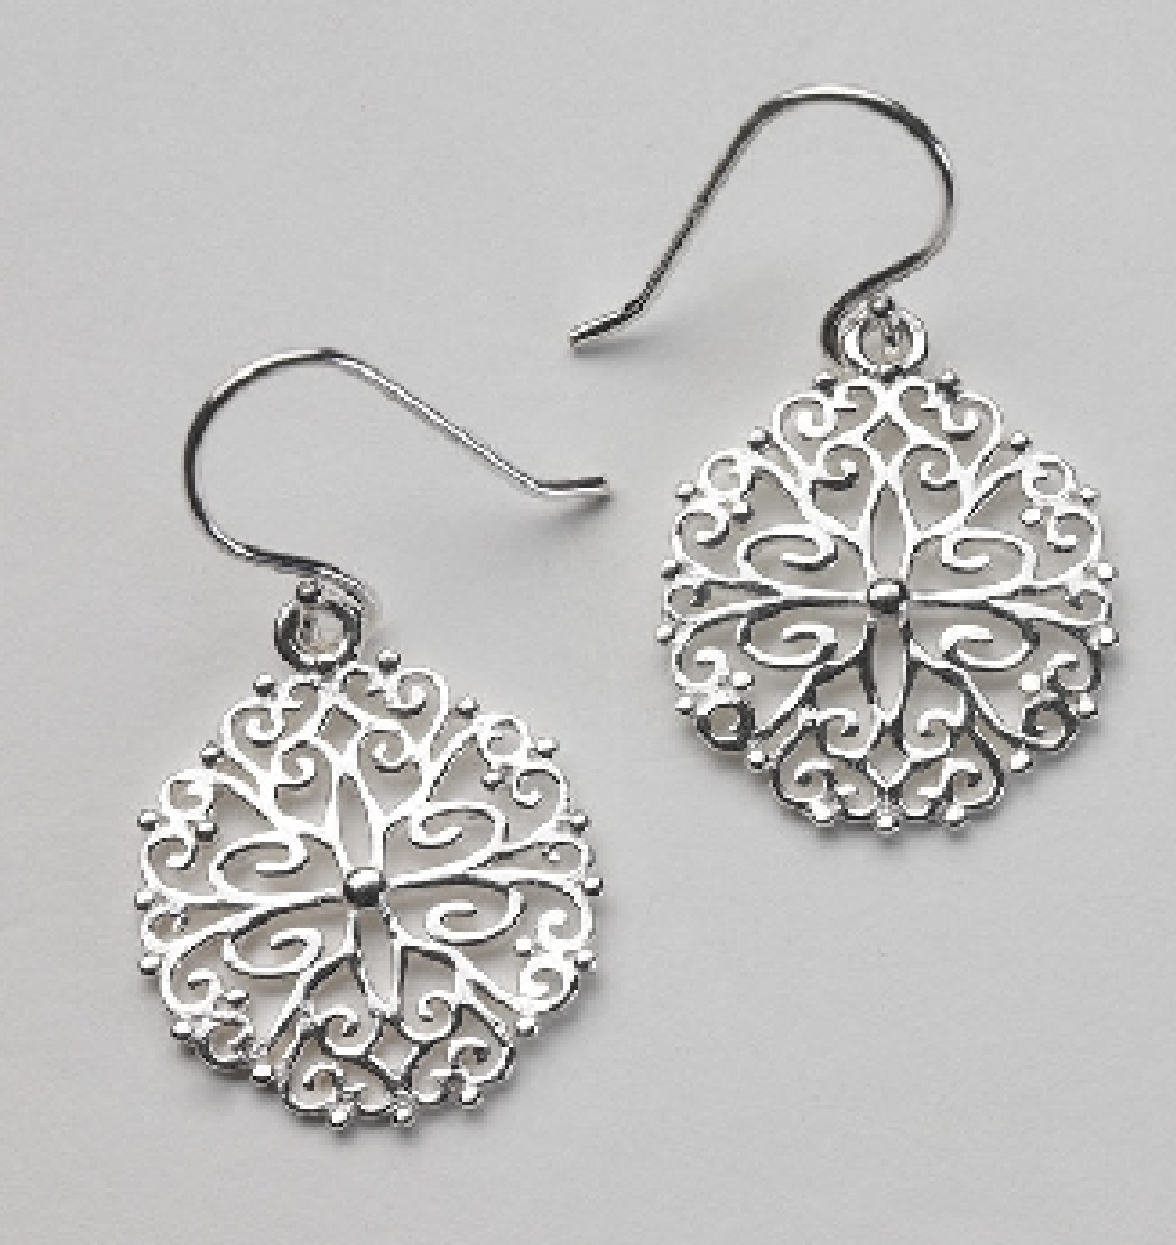 Southern Gates sterling silver earrings. Round filigree. 1   high by 7/8   wide (approx.)
E412
